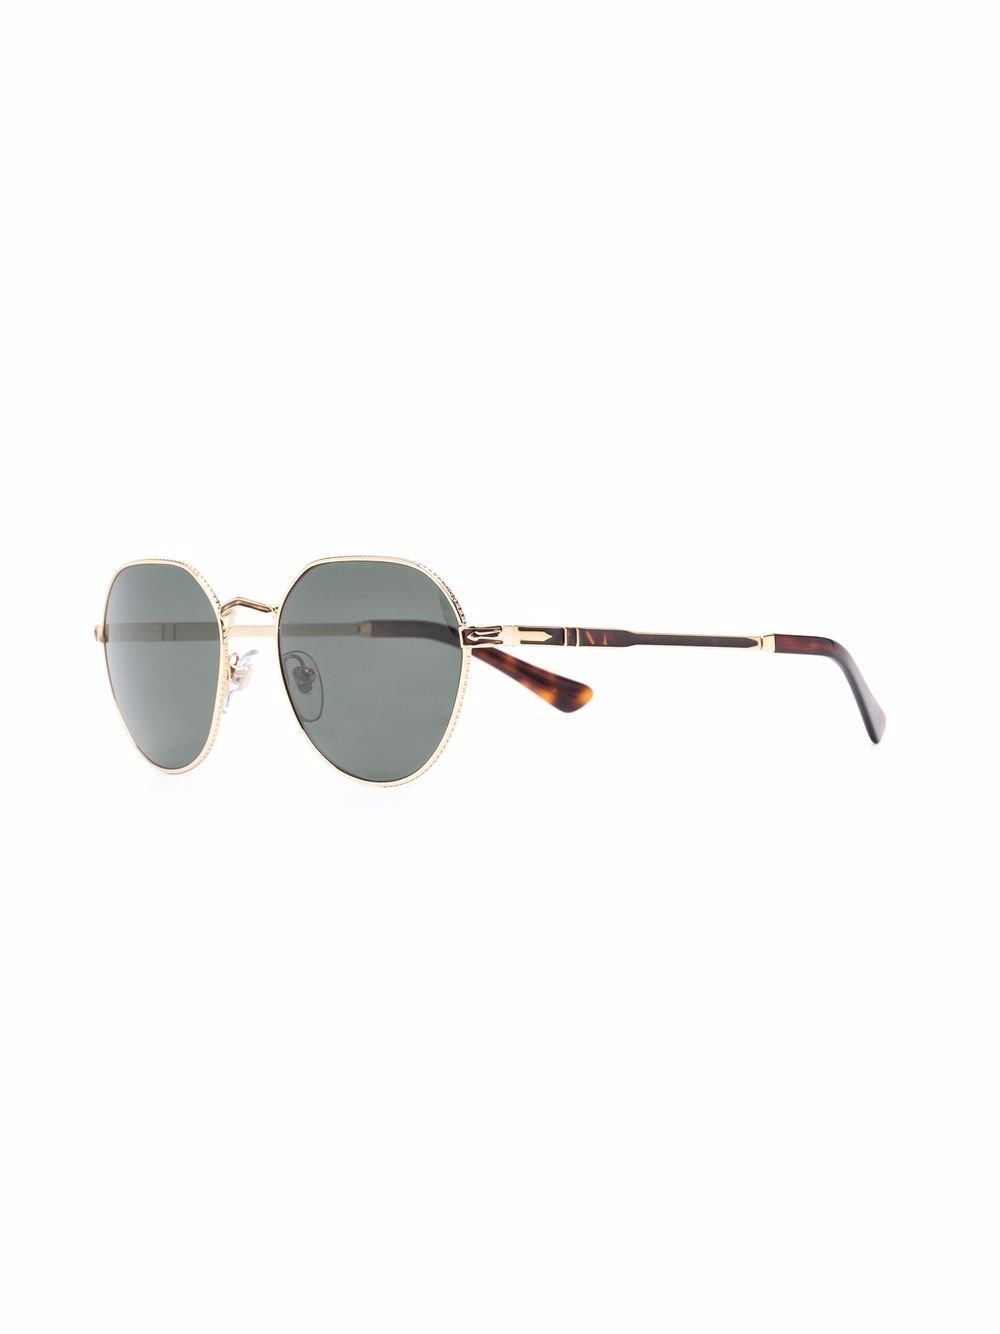 Image 2 of Persol polarized round-frame sunglasses